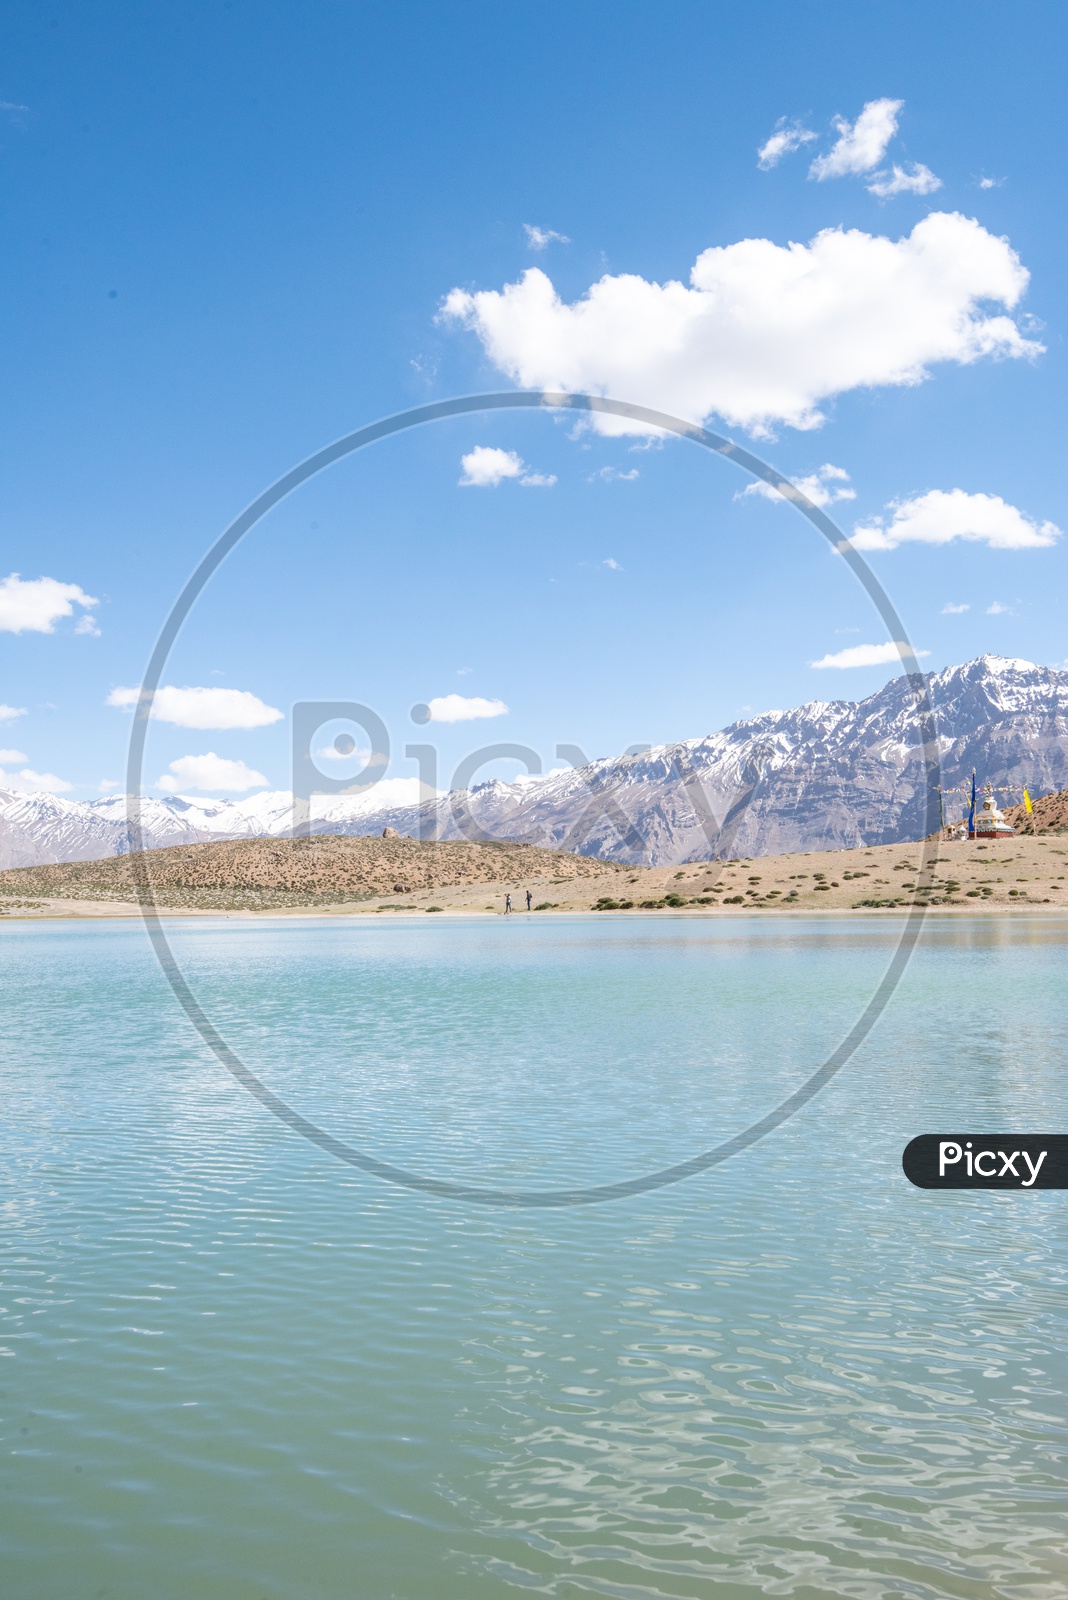 Dhankar lake with snow clad mountains in the background